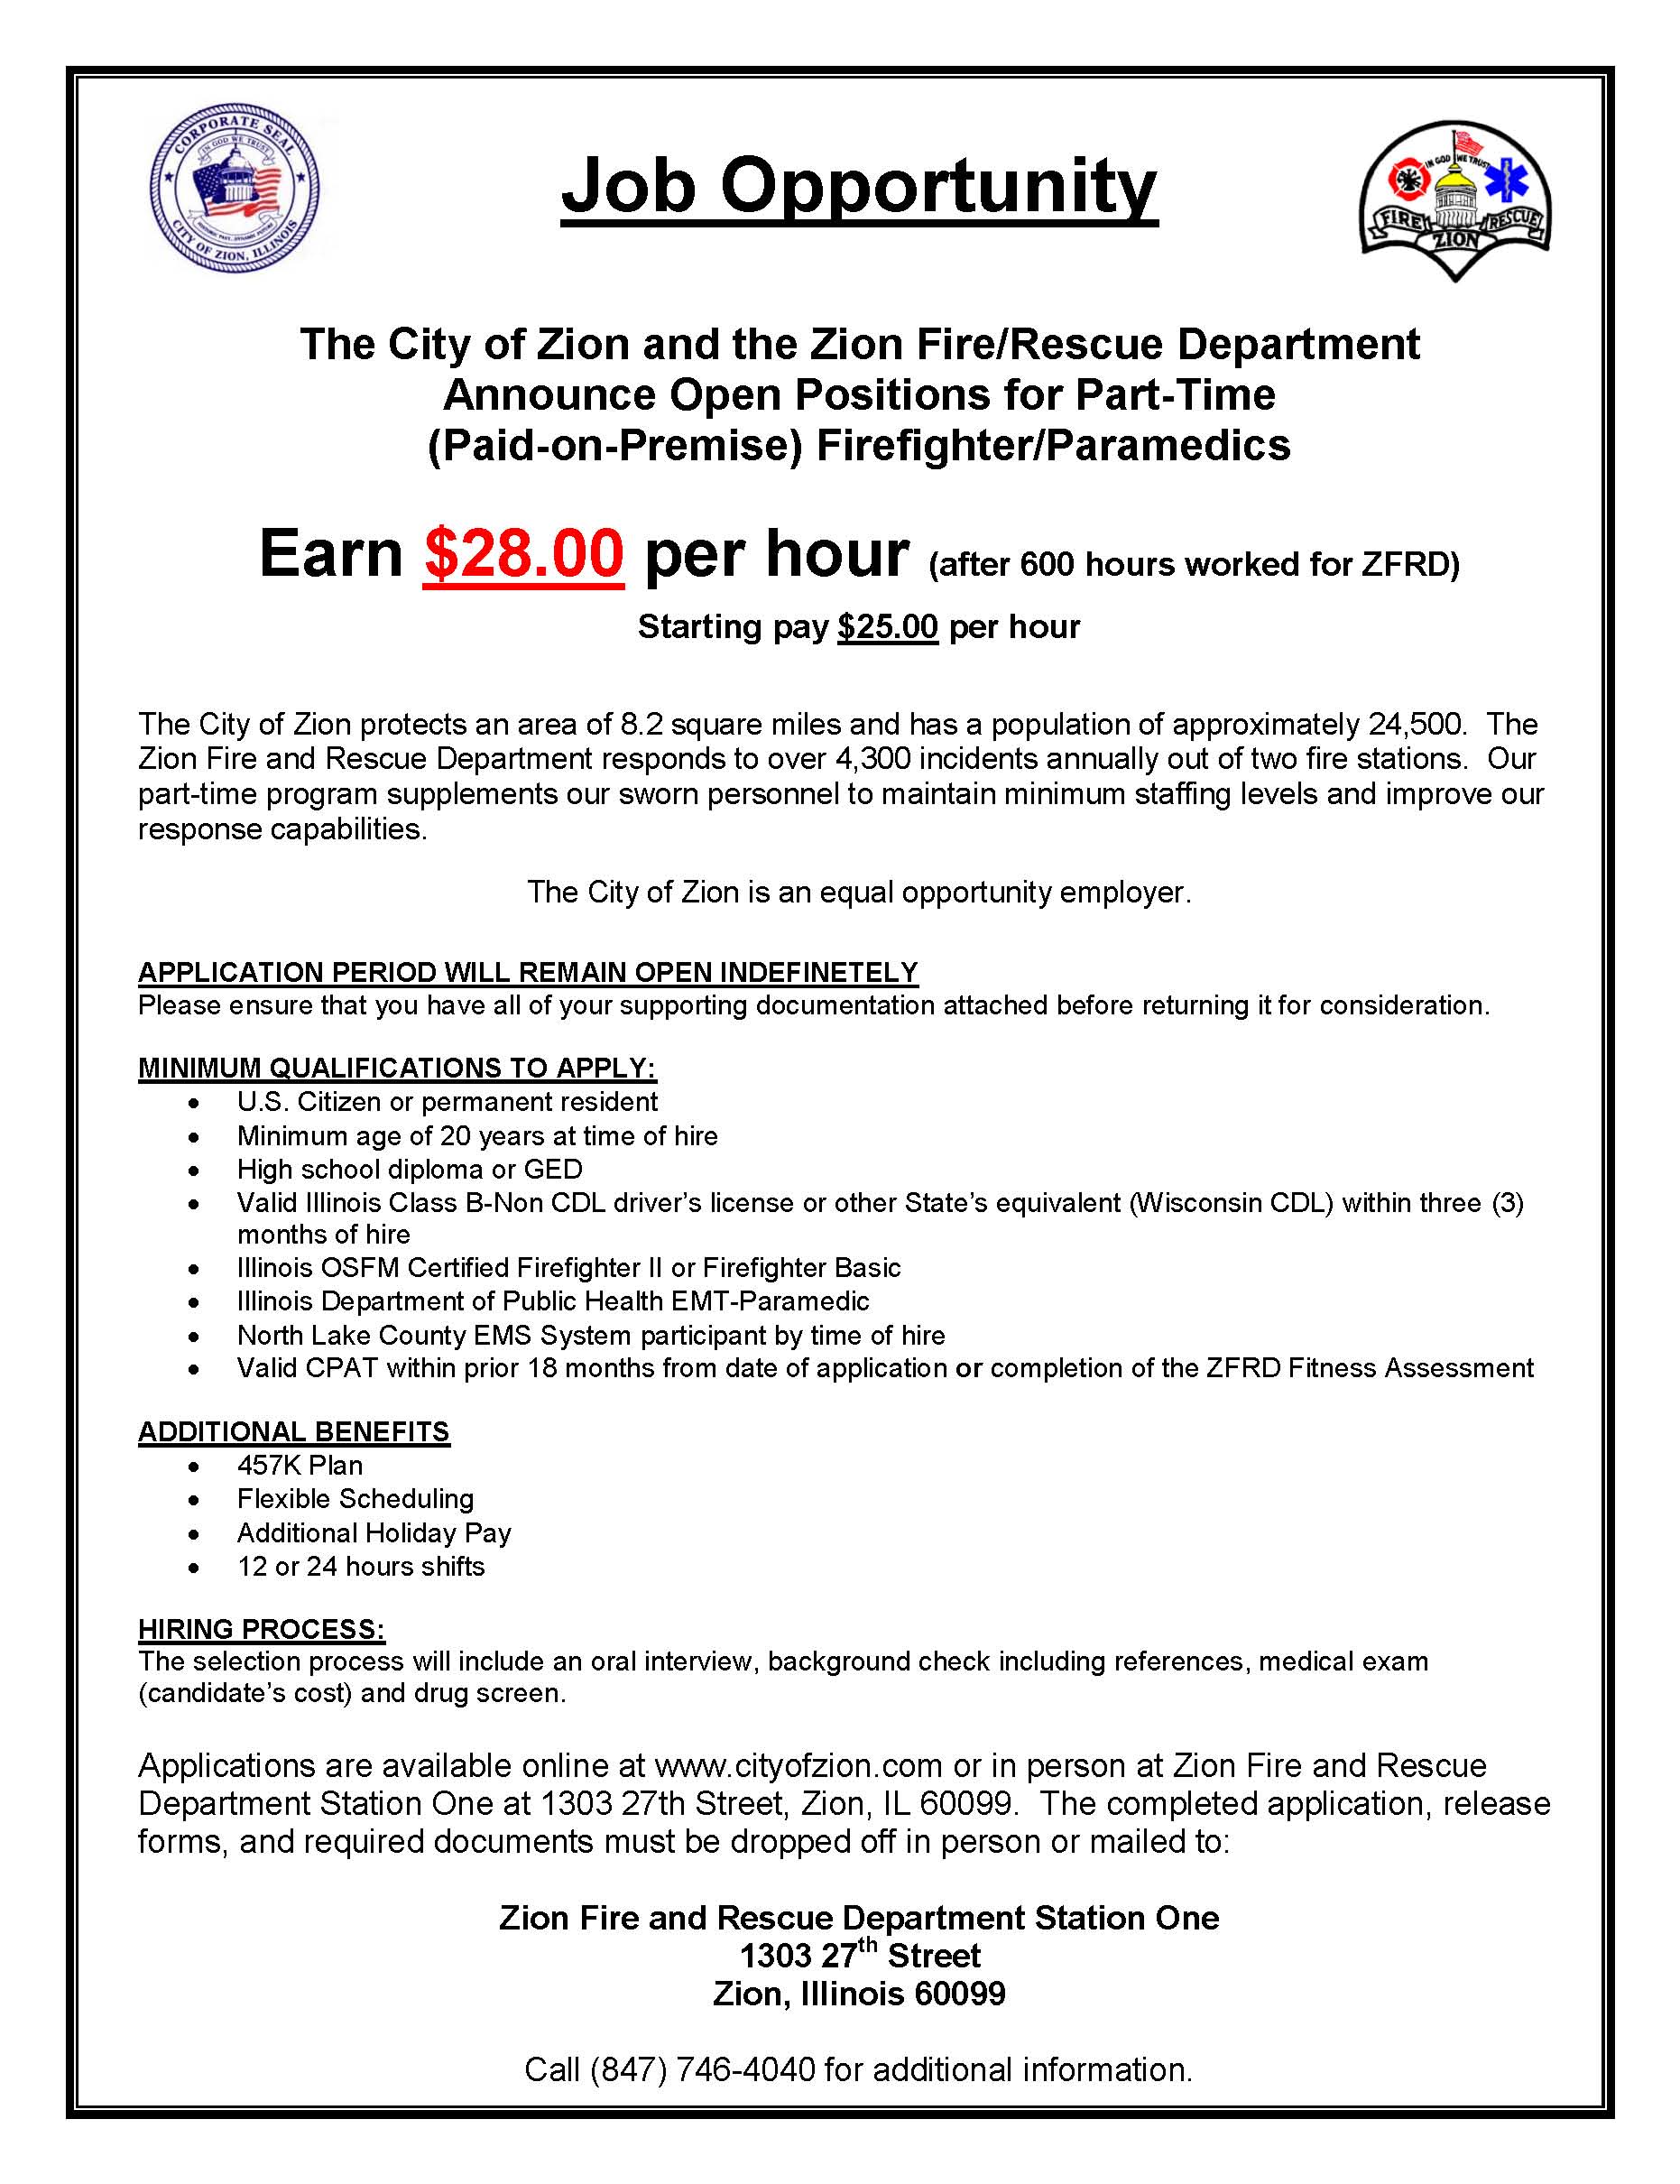 ZFRD Part-Time Firefighter Paramedic Flyer July 2021 - City of Zion